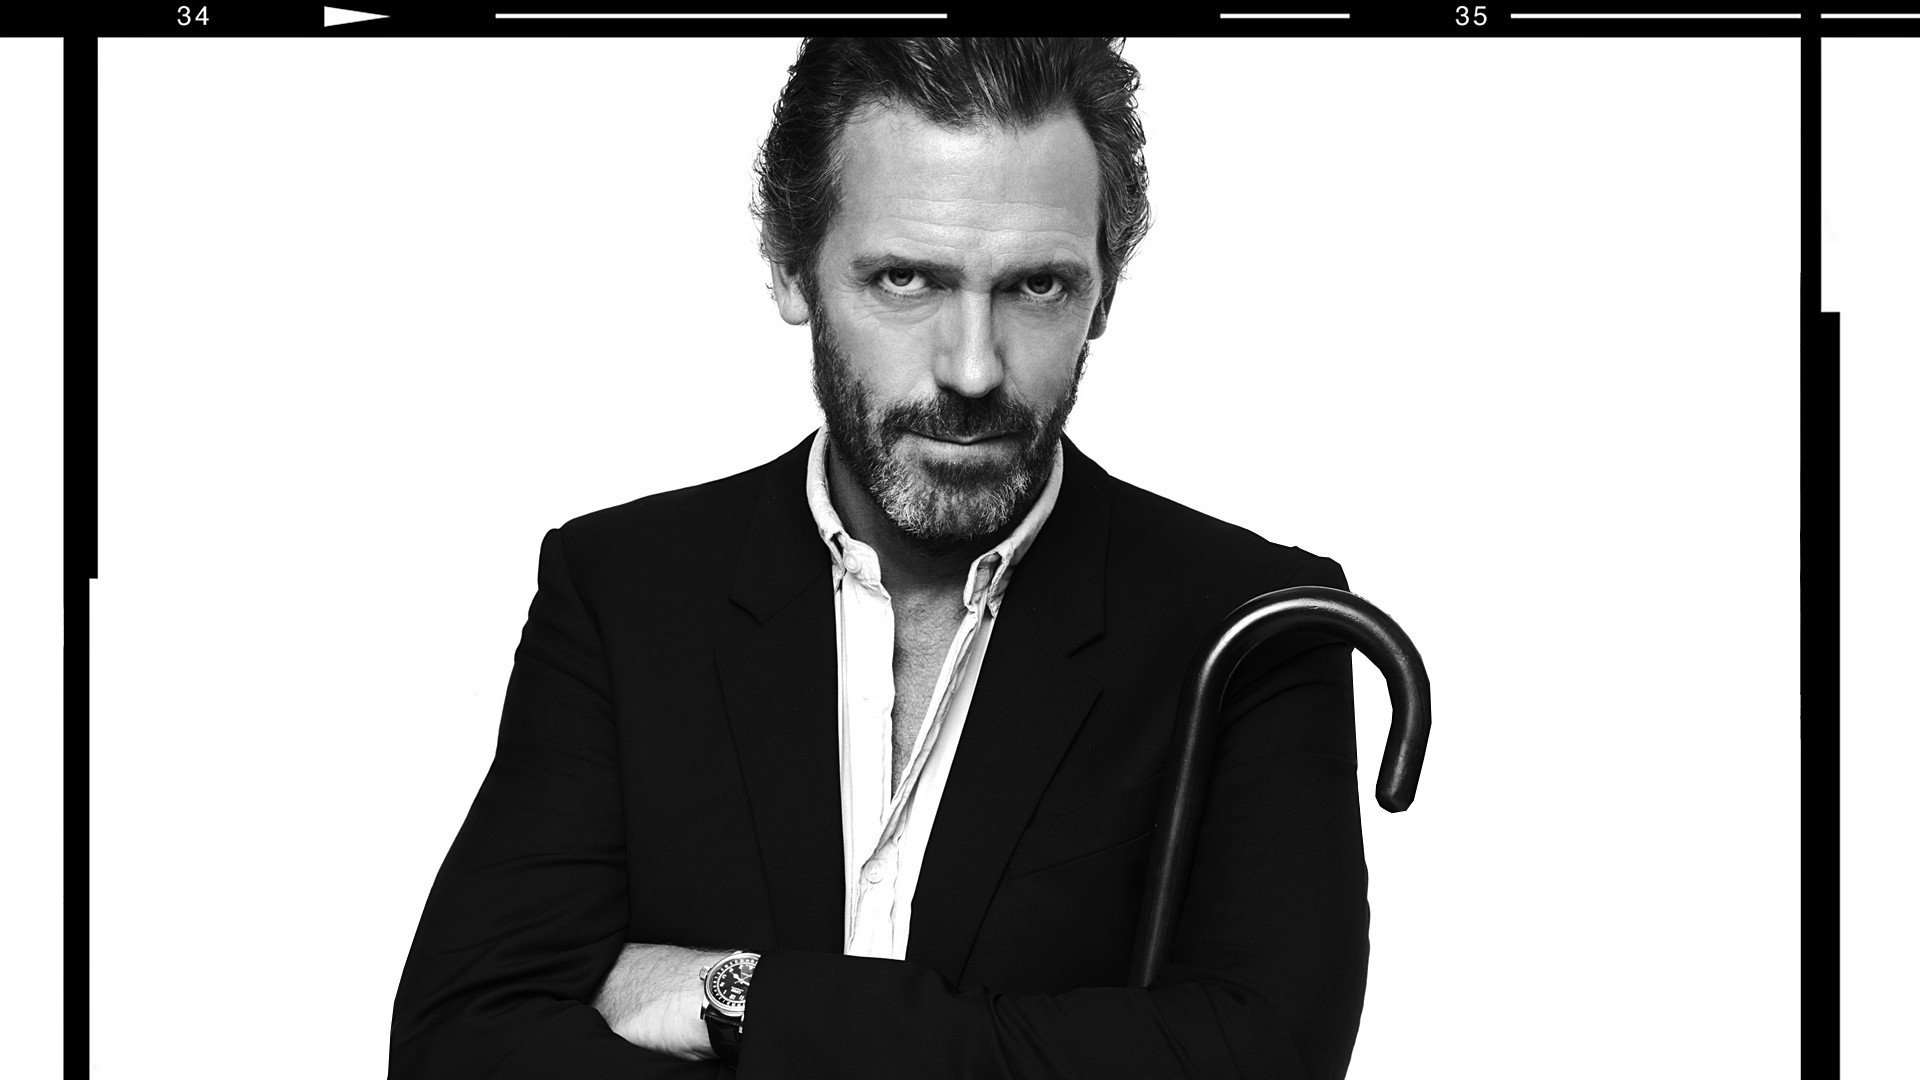 Free Dr. House high quality wallpaper ID:156702 for hd 1920x1080 desktop